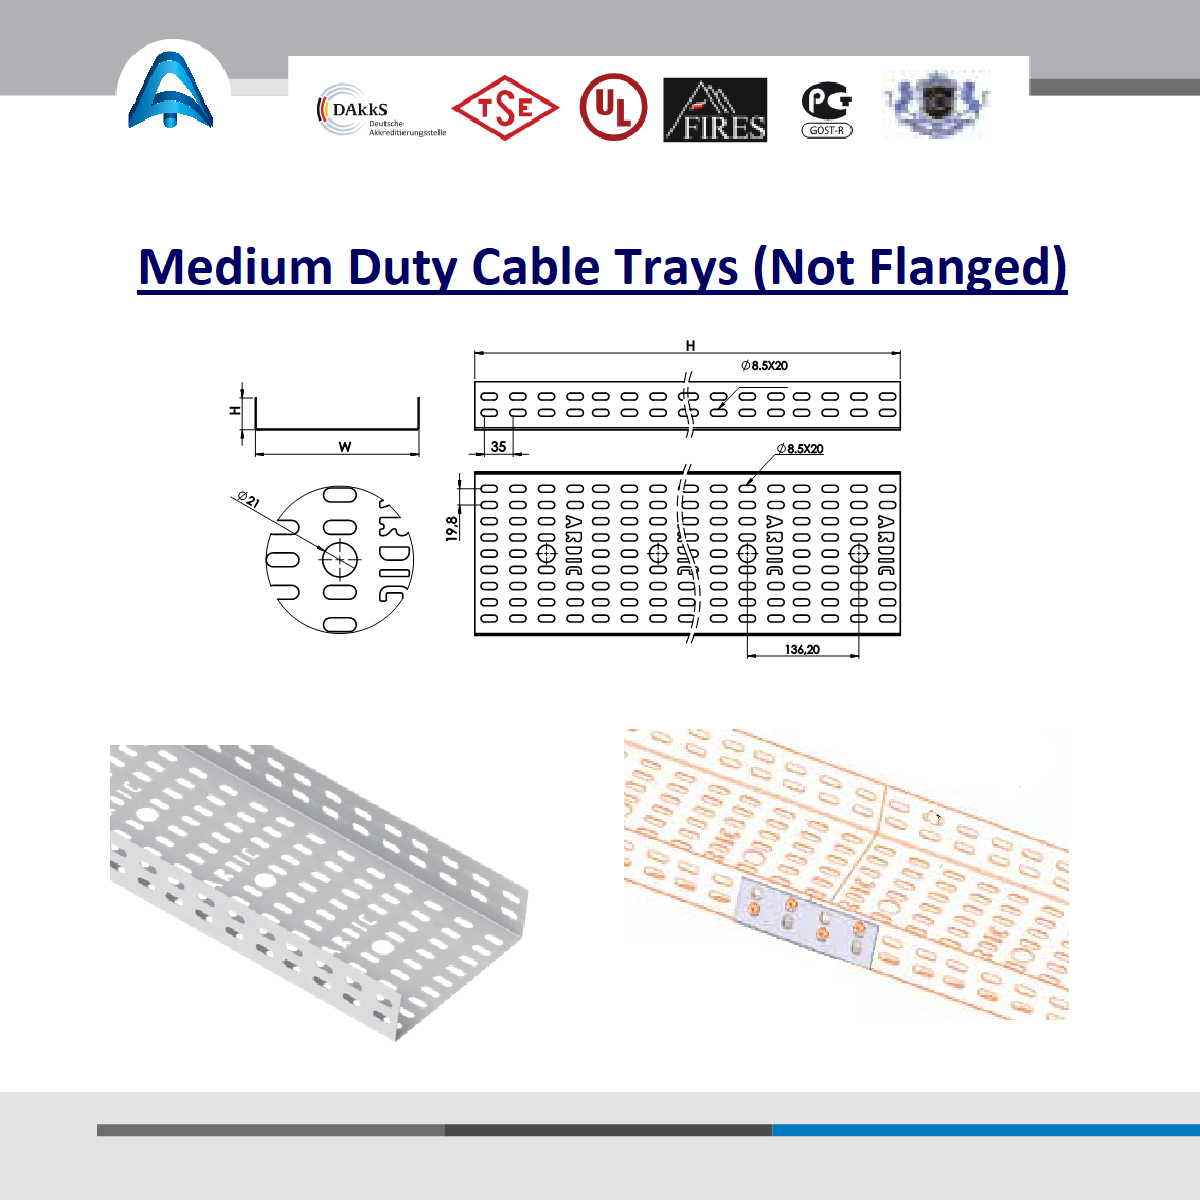 Medium Duty Cable Trays (Not Flanged)